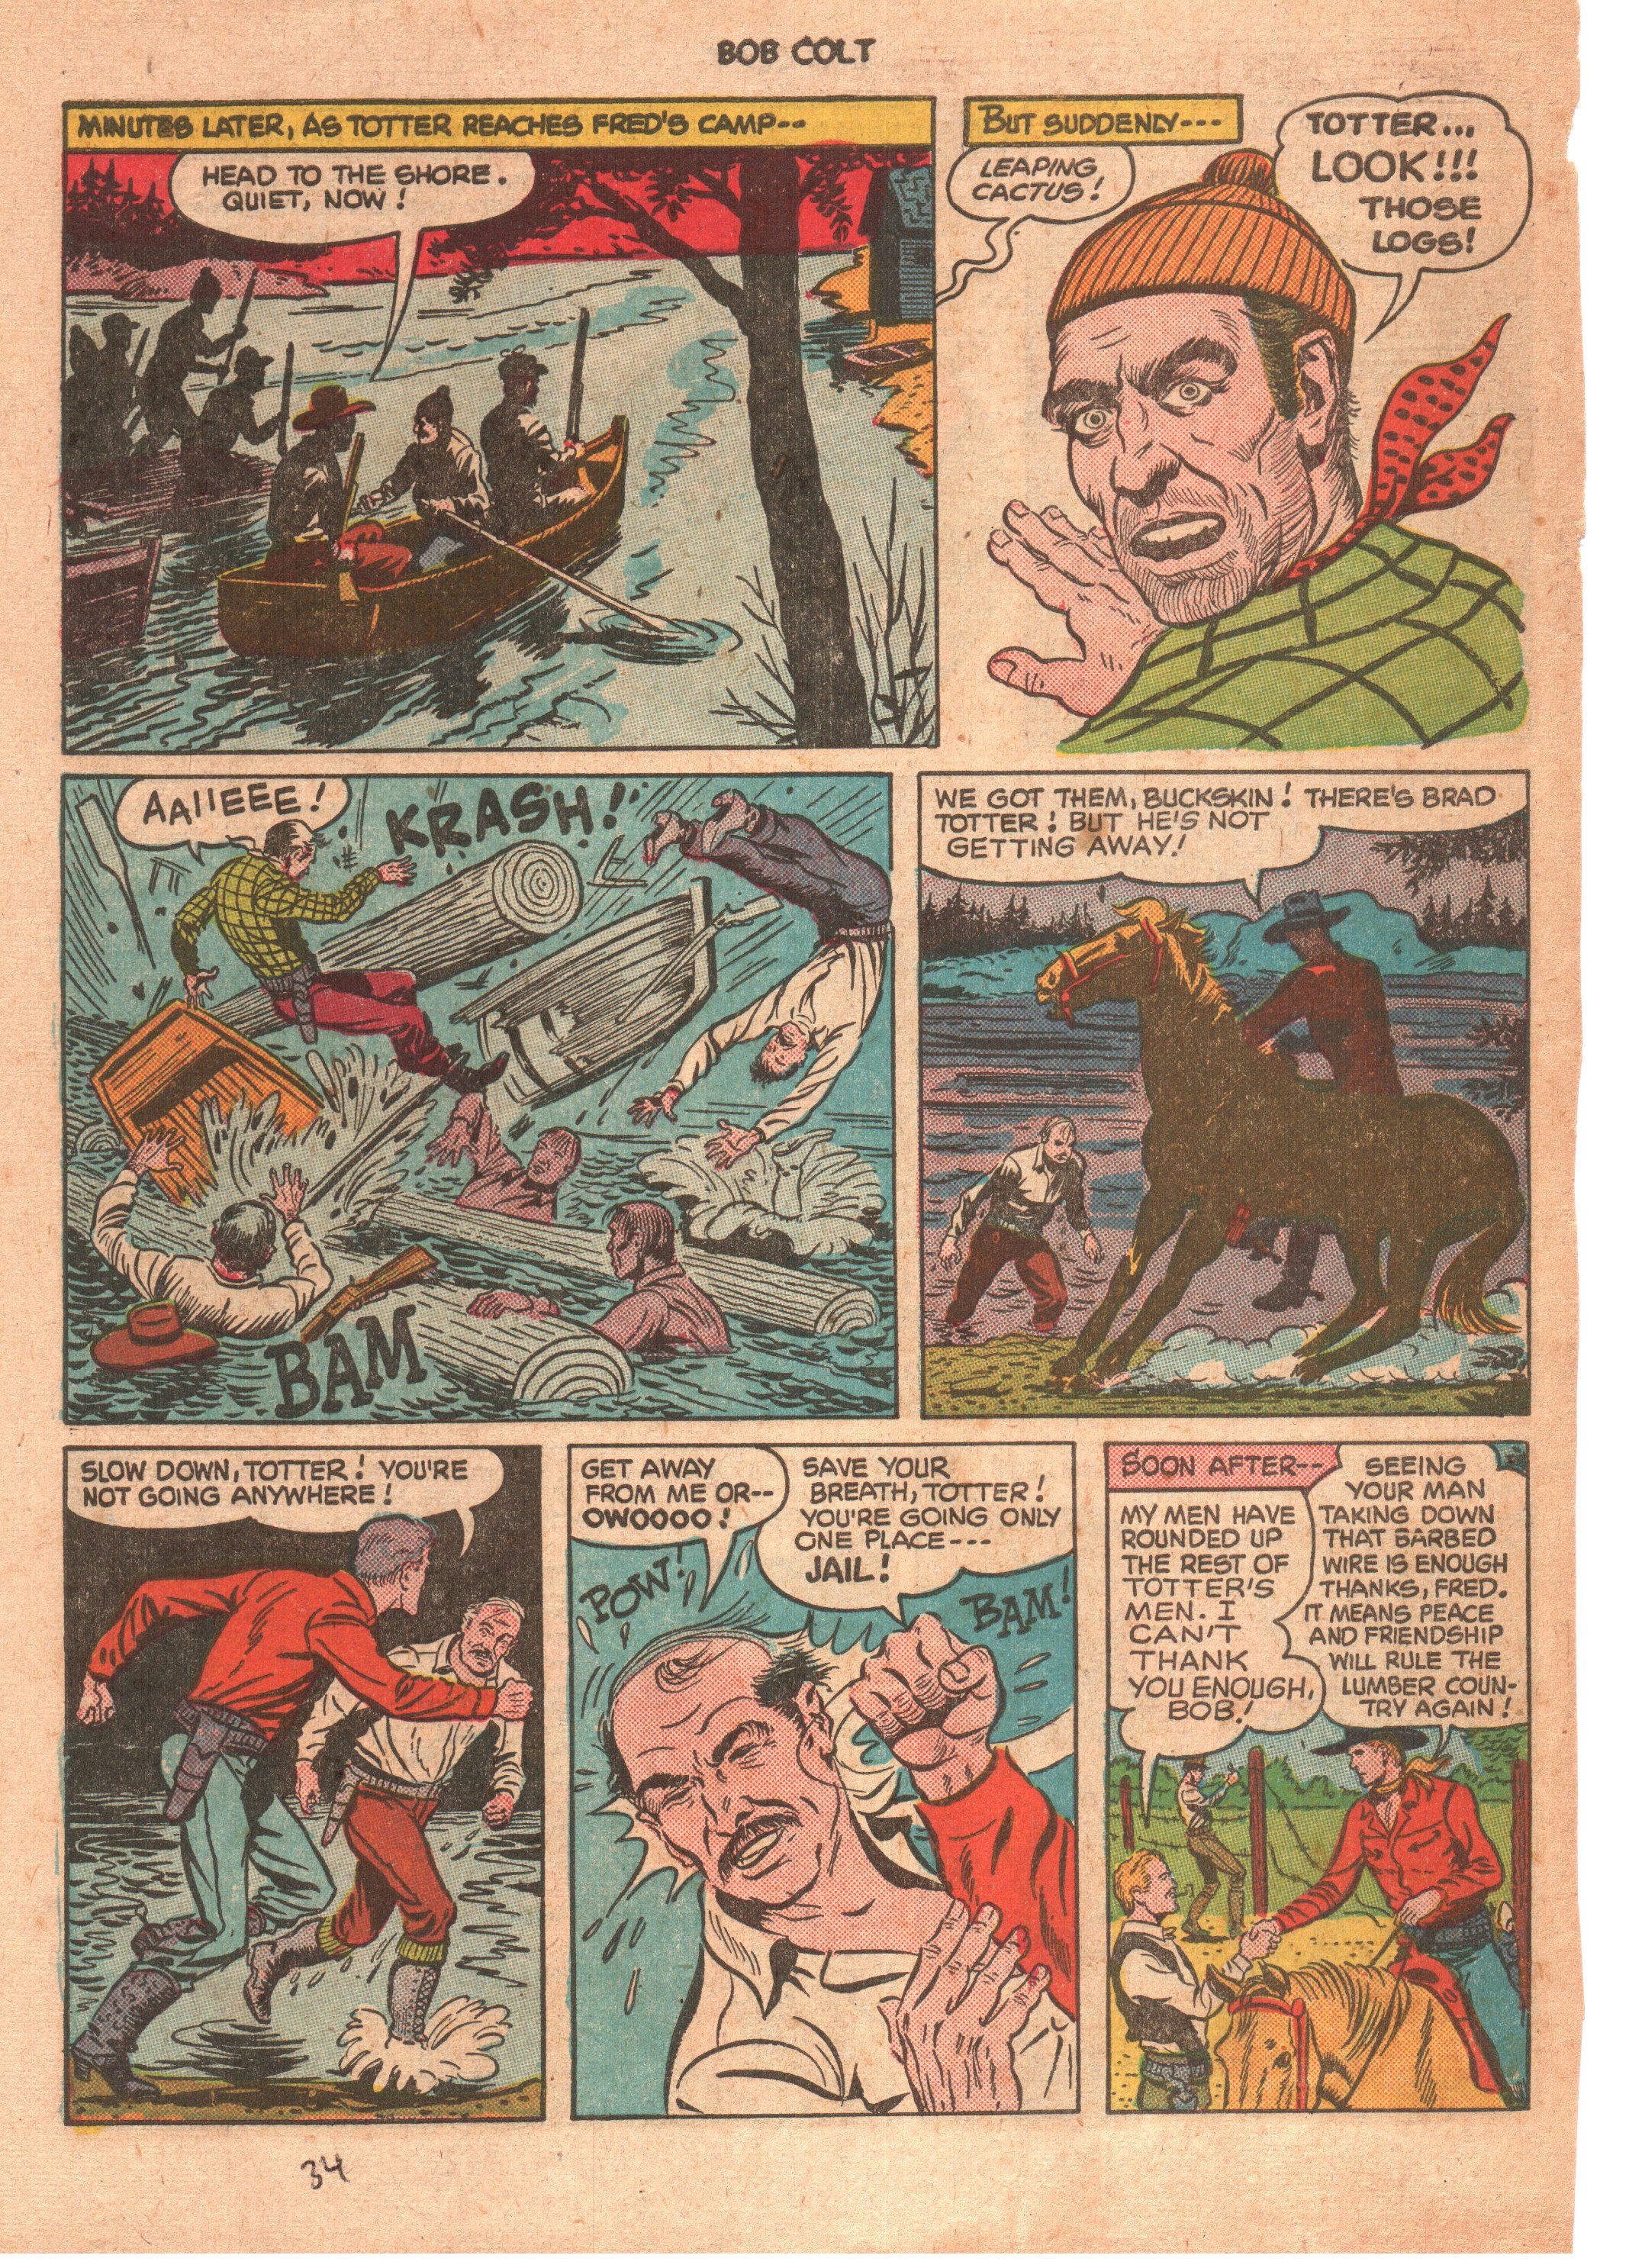 Read online Bob Colt Western comic -  Issue #4 - 34